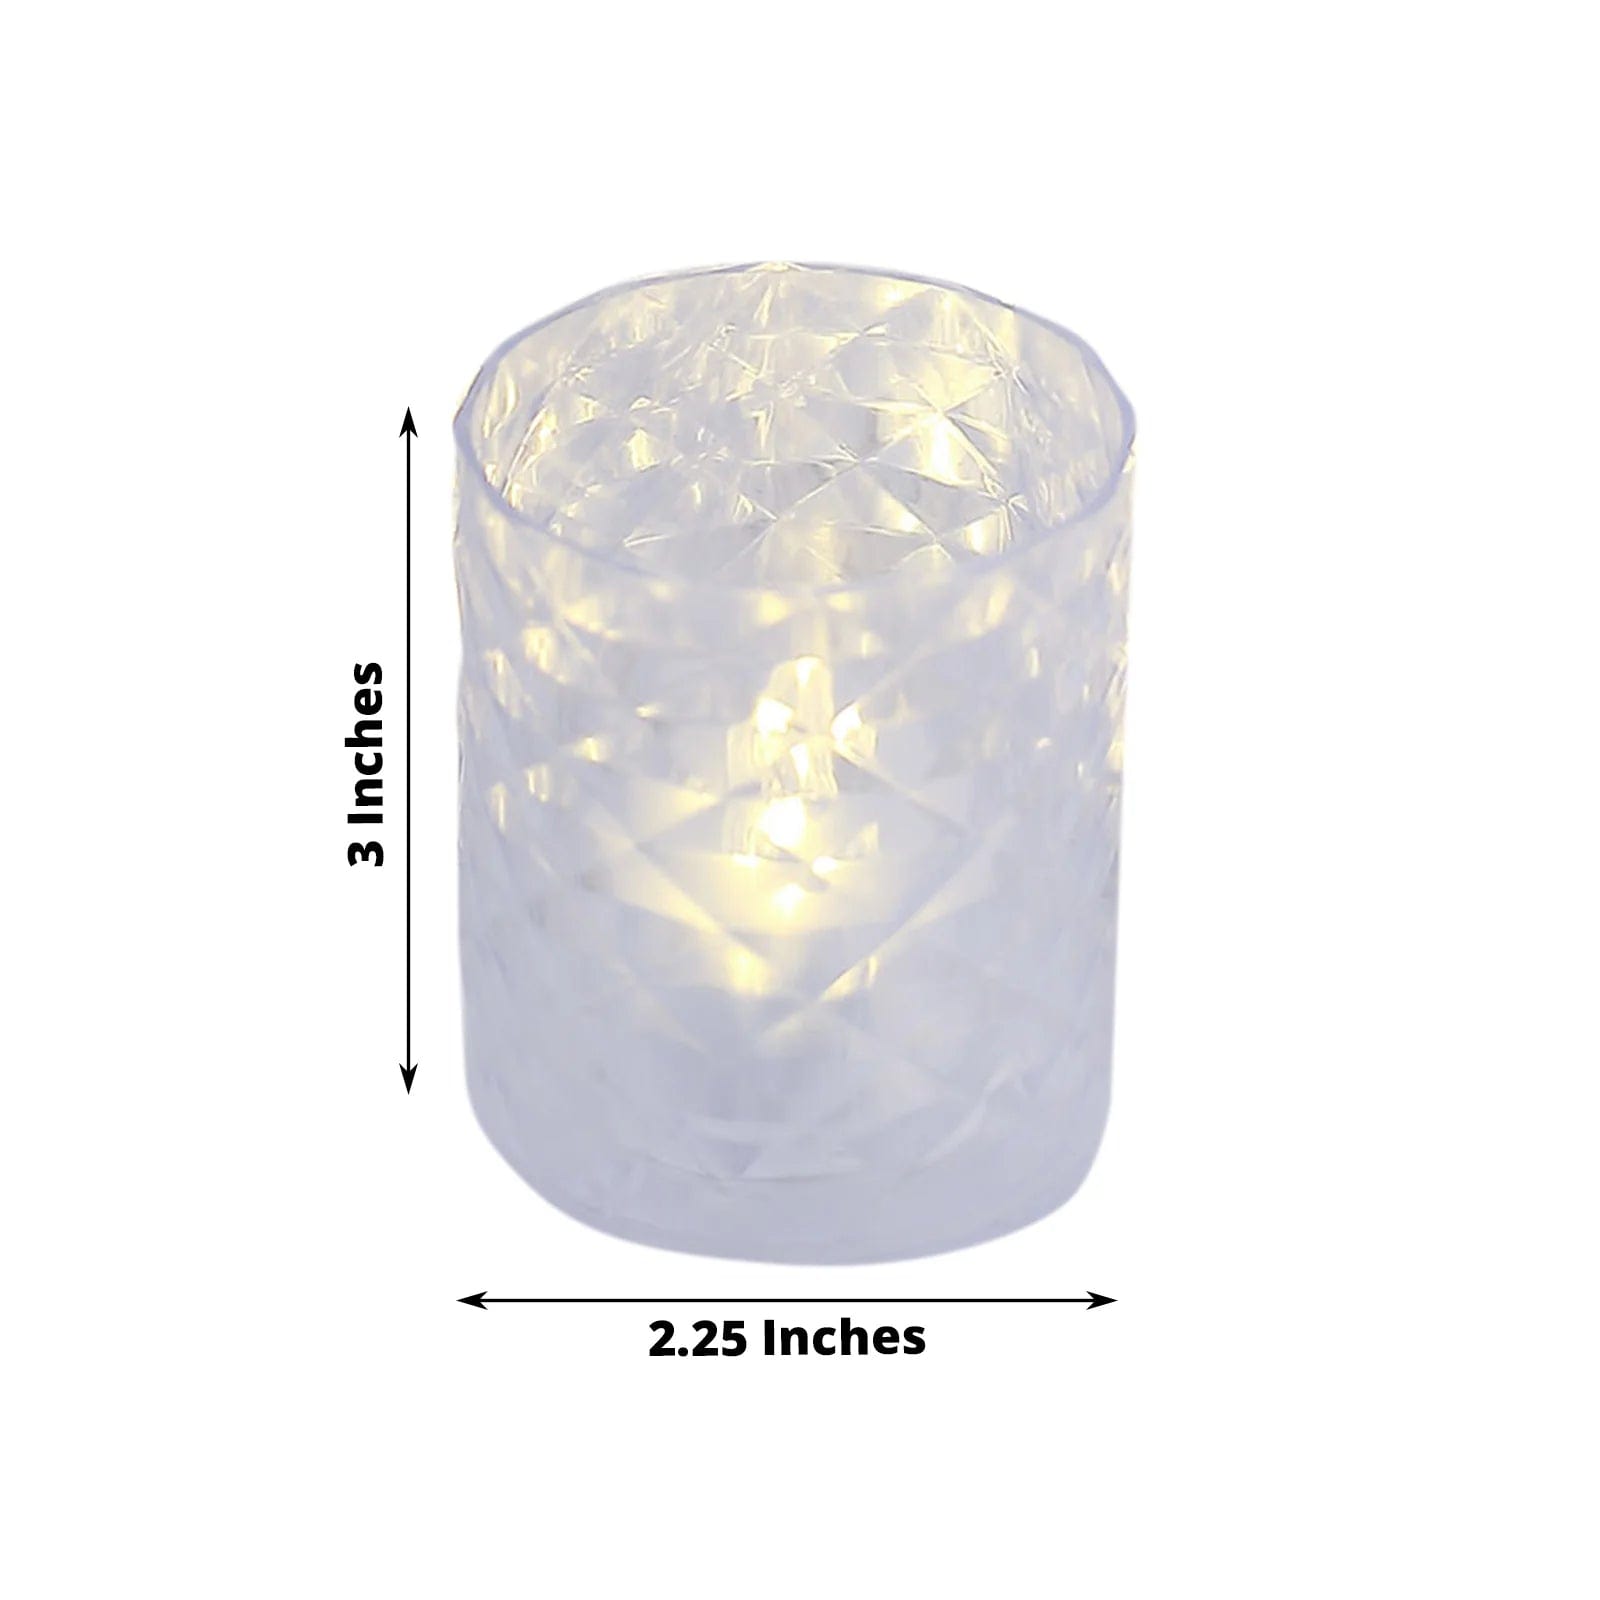 12 Clear 3 in Flameless LED Tealight Candles with Acrylic Holders